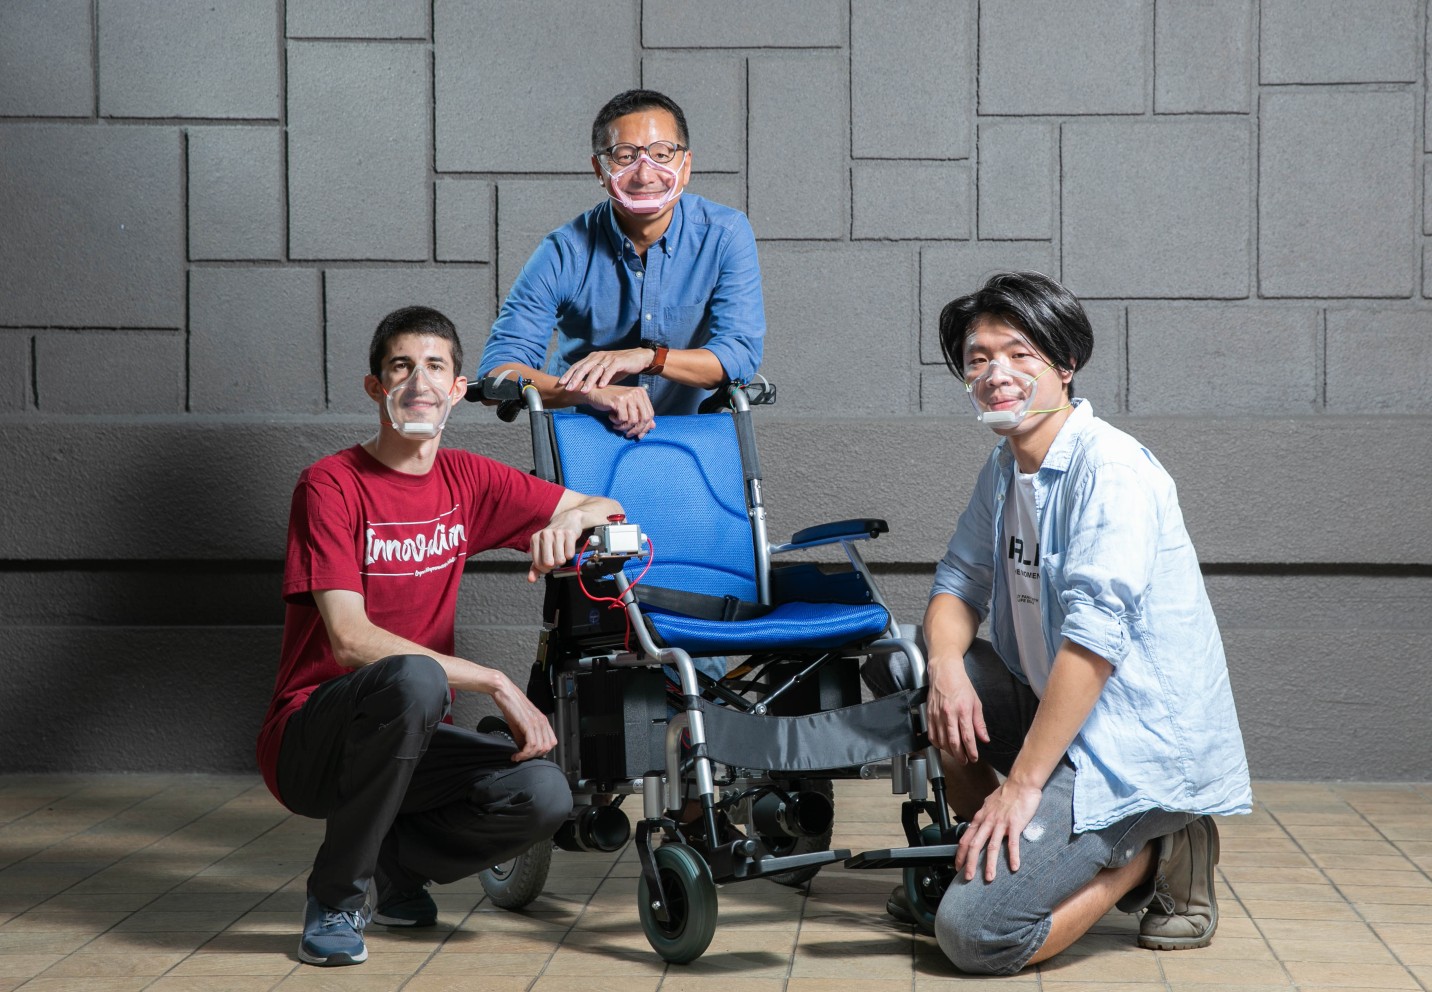 Brian Michael Katona, Prof Albert Ko and Ian Wong from the Lingnan Entrepreneurship Initiative receive MUSE Design for their “CREW Wheelchair Control System” and “12° Mask”.